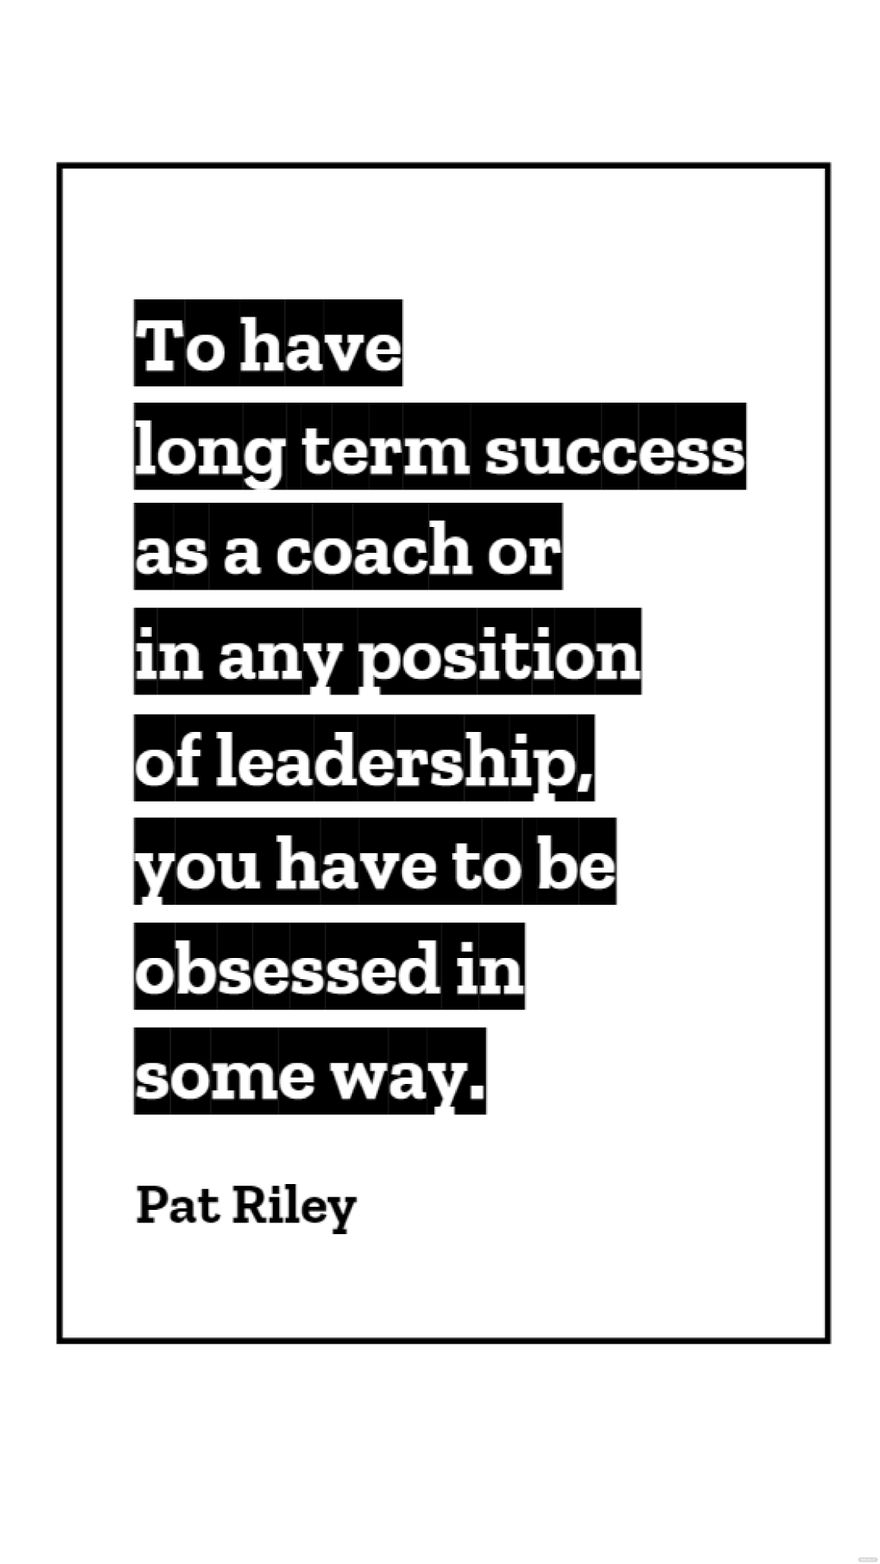 Pat Riley - To have long term success as a coach or in any position of leadership, you have to be obsessed in some way.